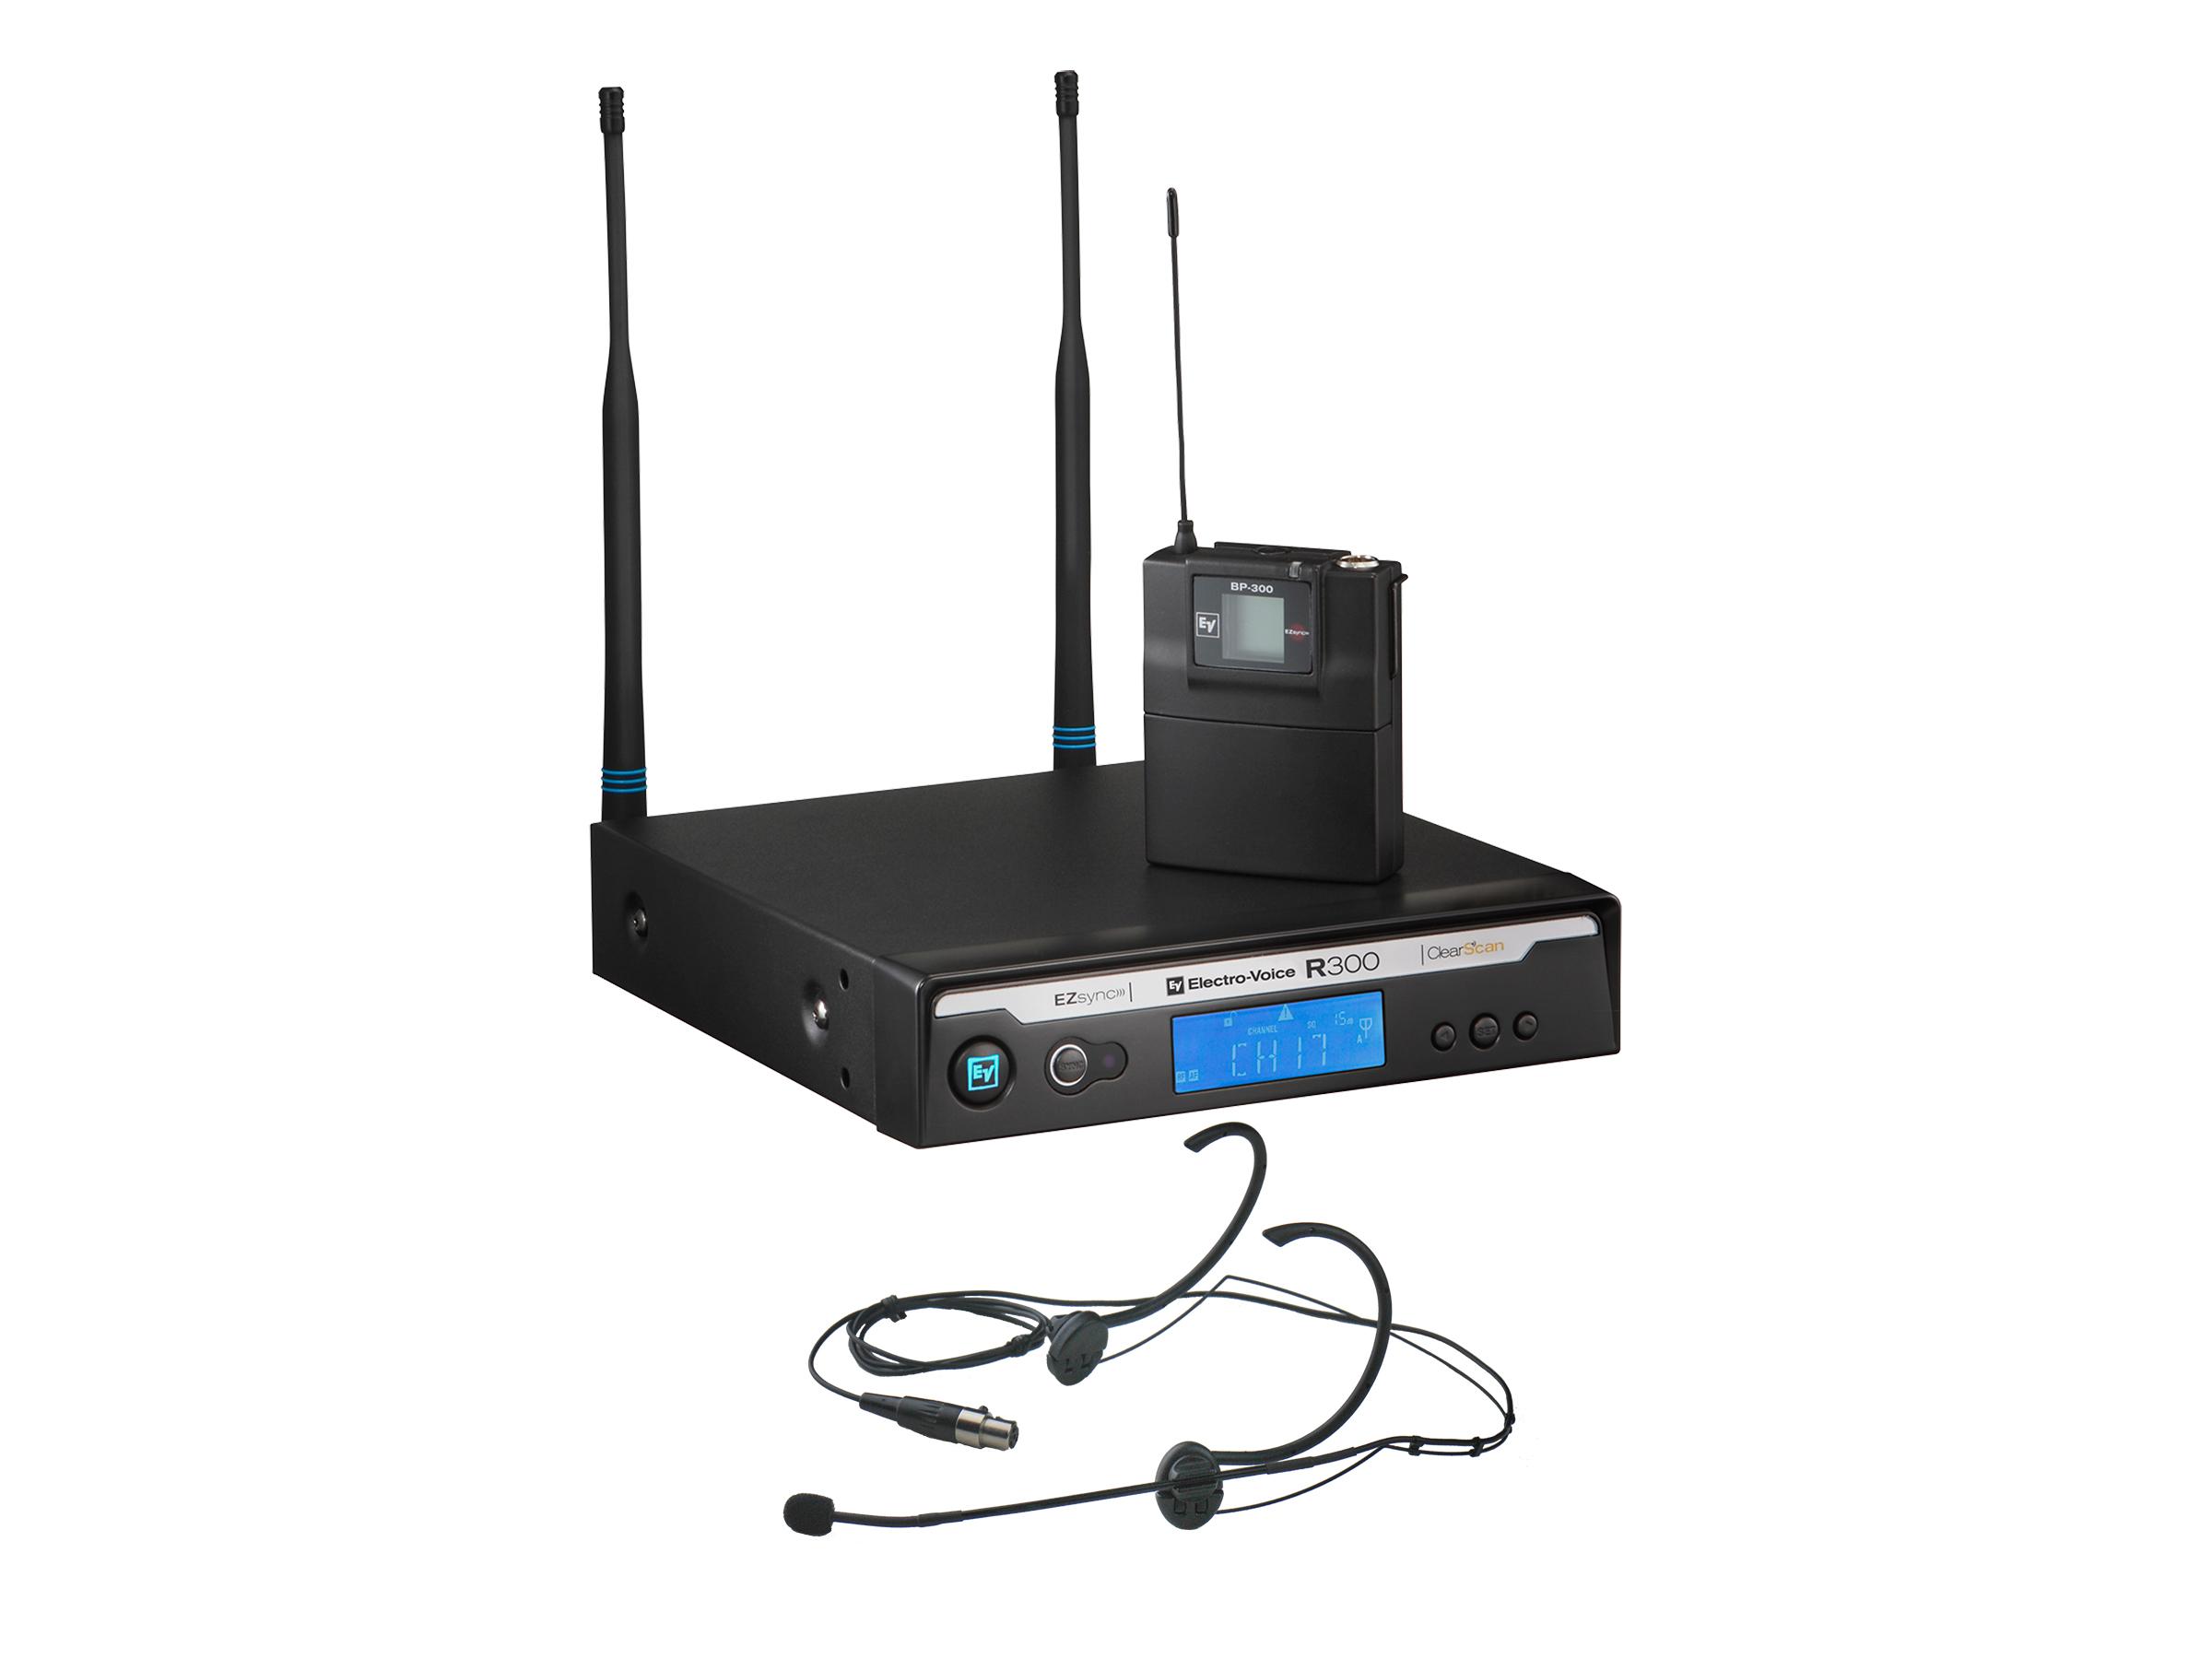 R300EC R300 Series Wireless Head Worn HM-3 Microphone System C-Band/516-532 MHz by Electro-Voice